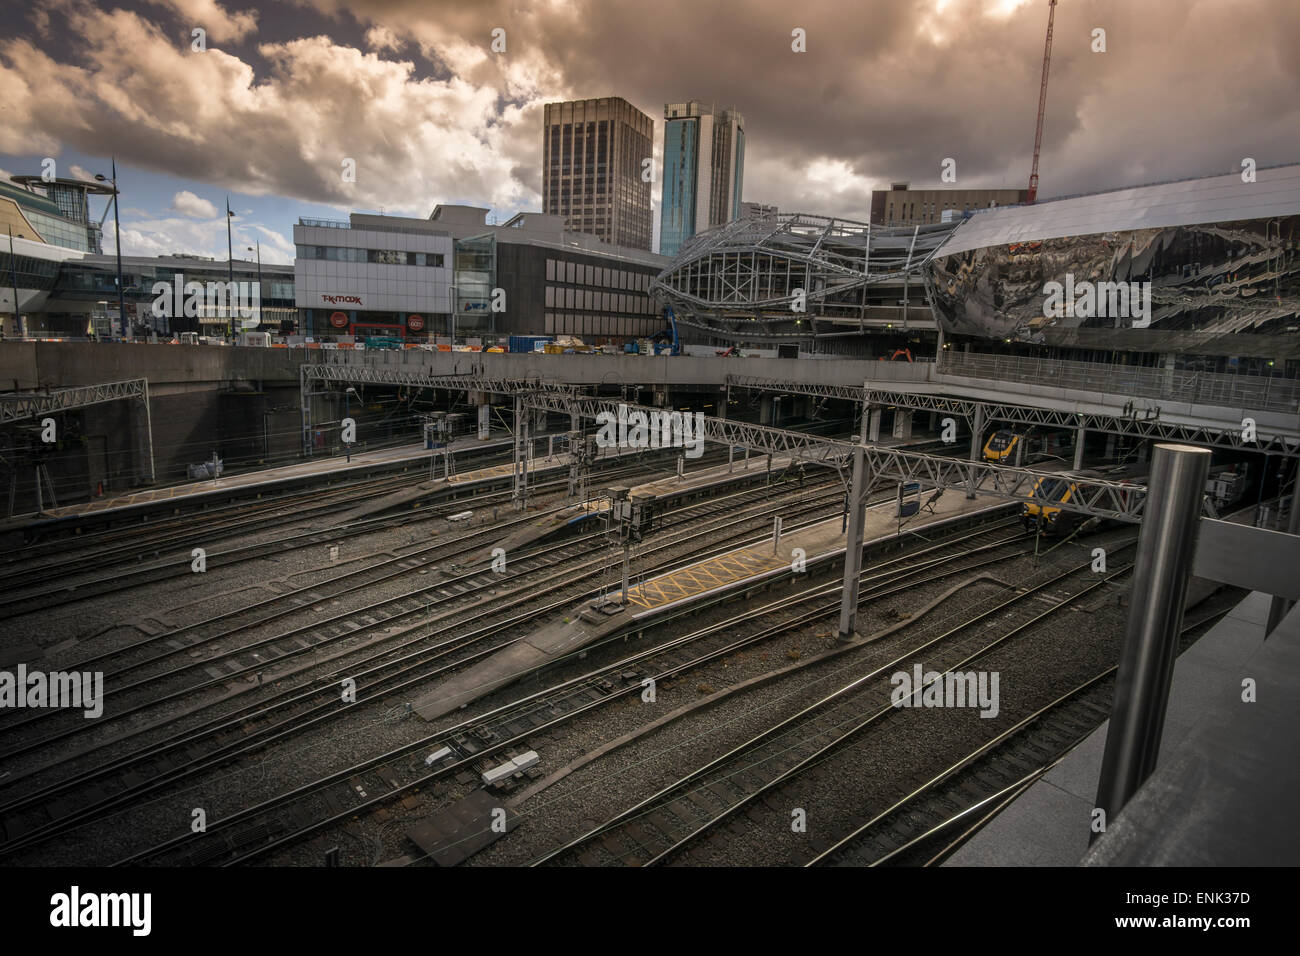 Birmingham, England.  May 4th,2015, New architecture, New St Station. Stock Photo